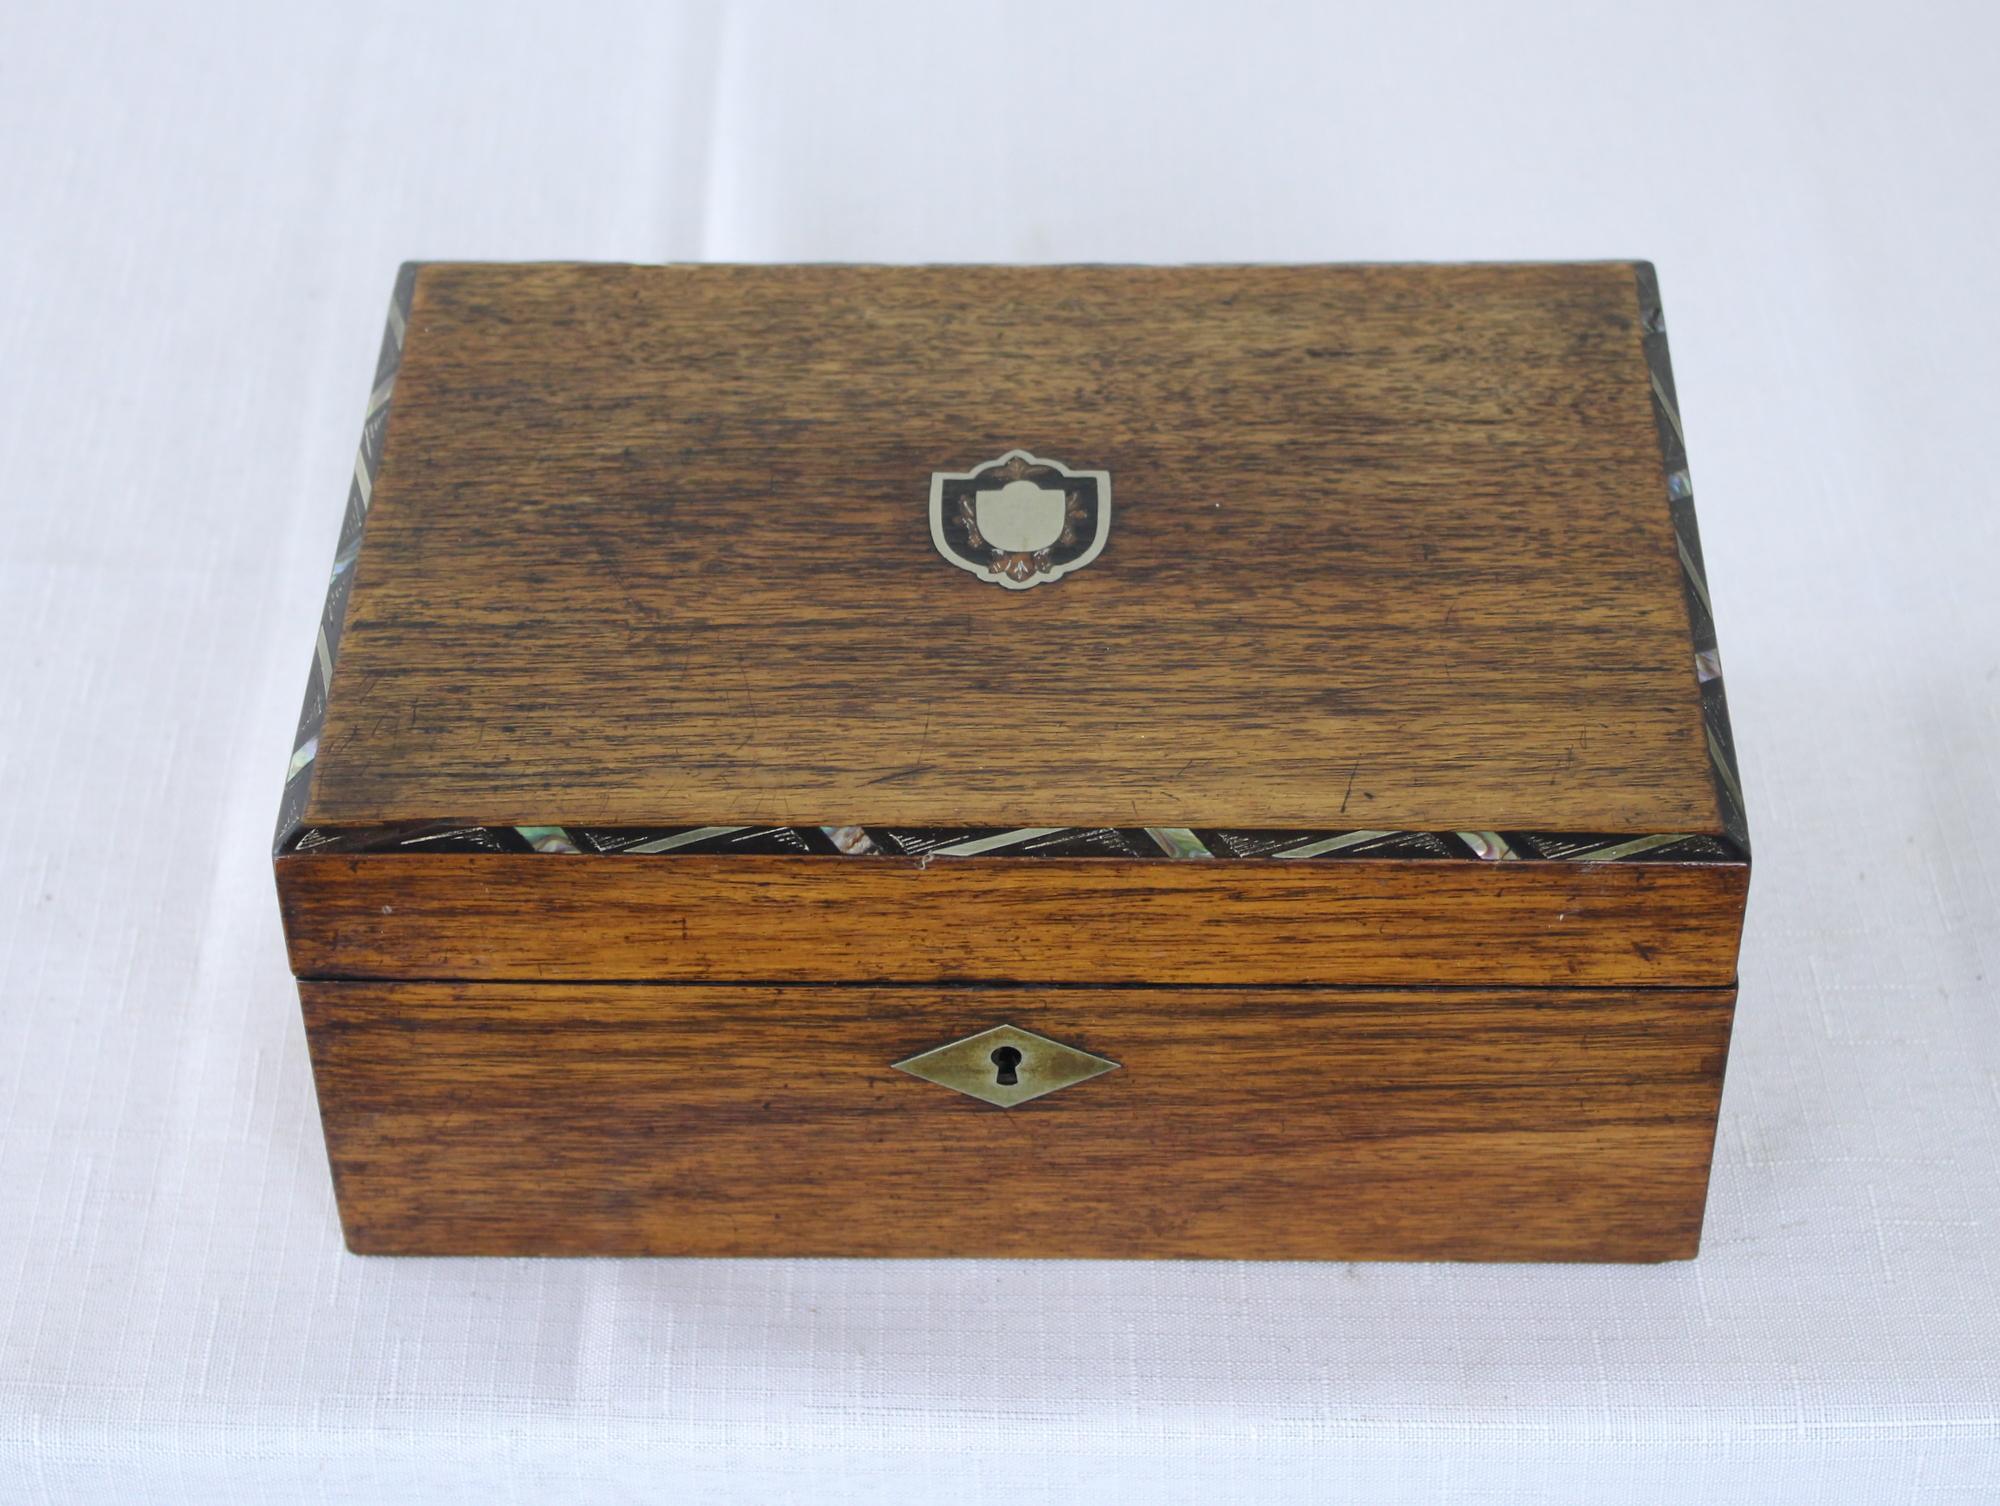 A Victorian ladies sewing box with geometric mother of pearl inlay around the top and a mother of pearl inlay medallion at the center. Small compartments in the interior removable shelf, some with silk box tops.